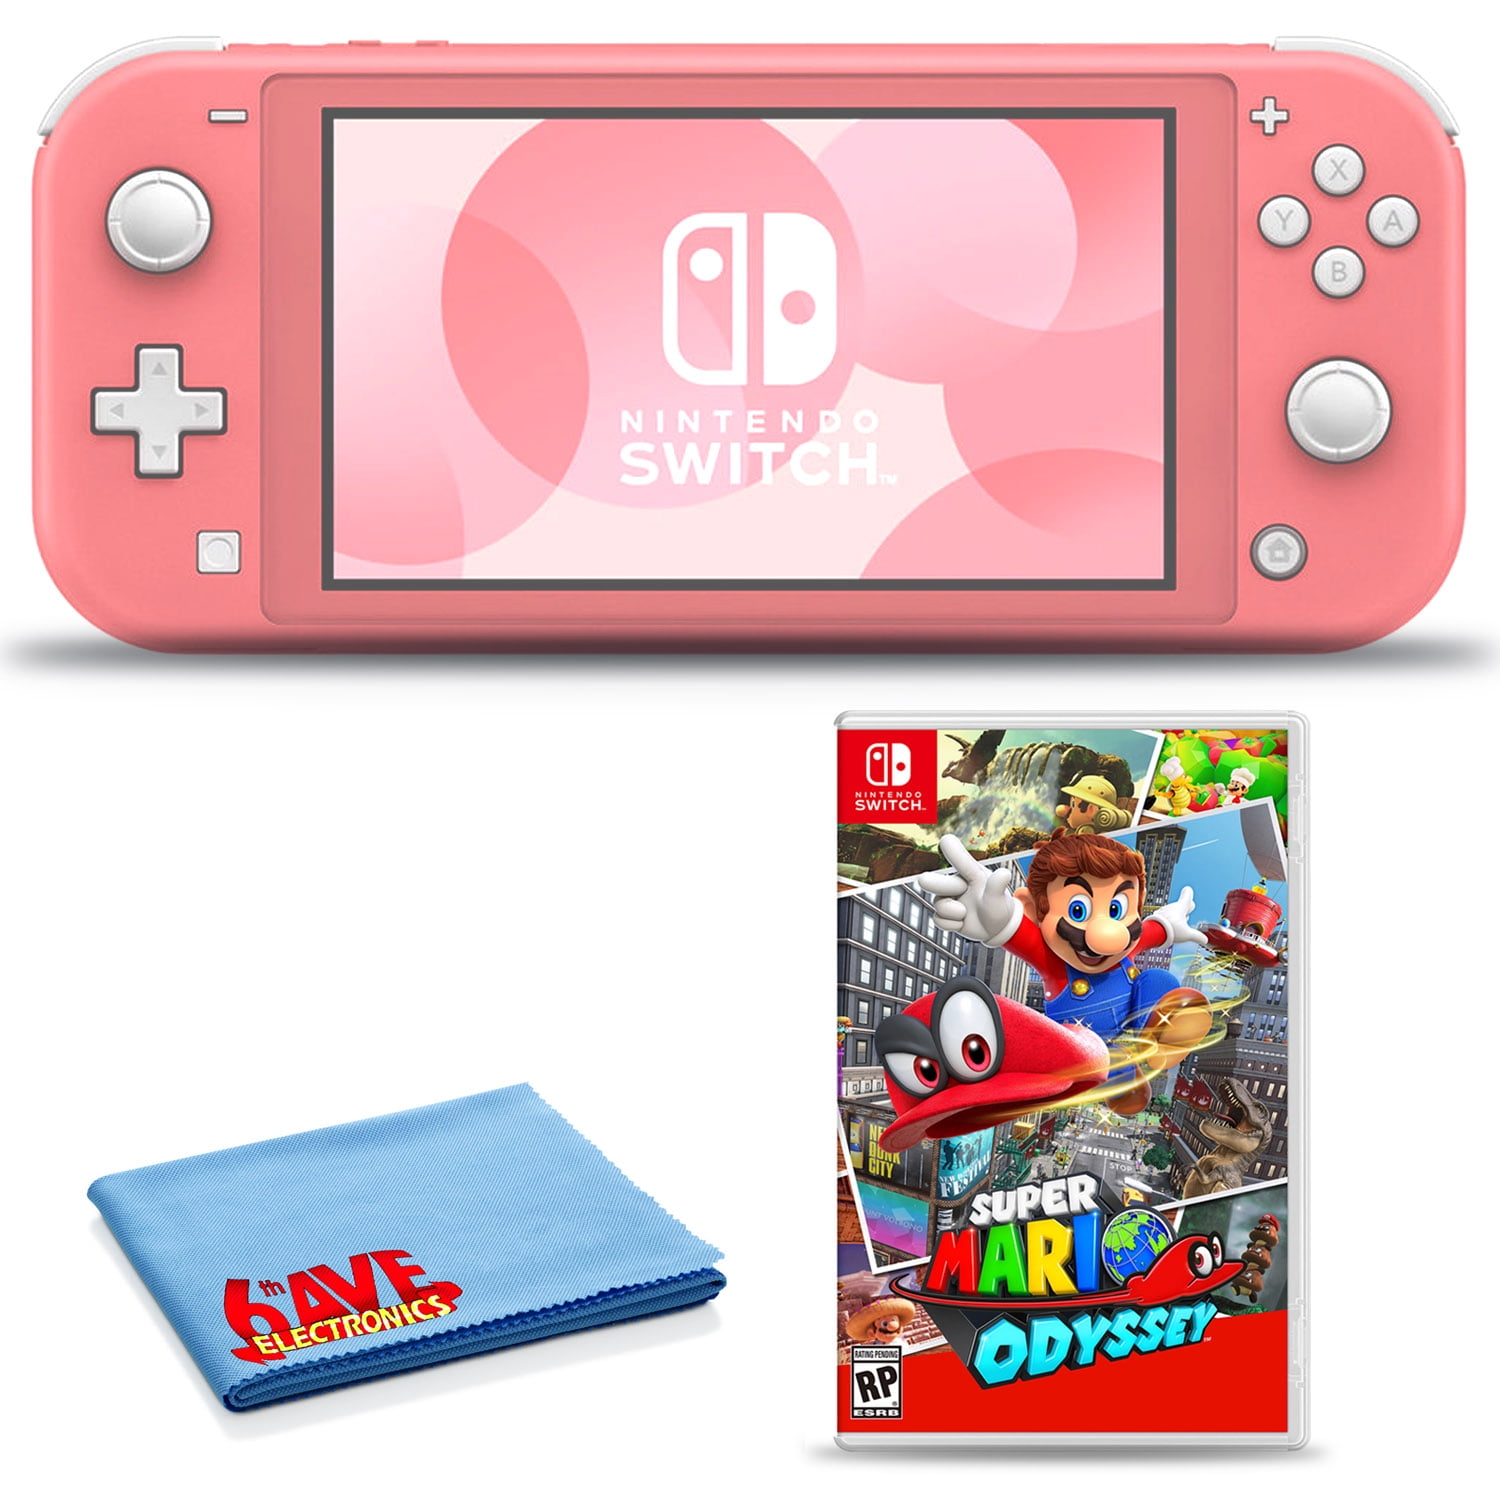 Nintendo Switch Lite (Coral) Bundle with Super Mario Odyssey and